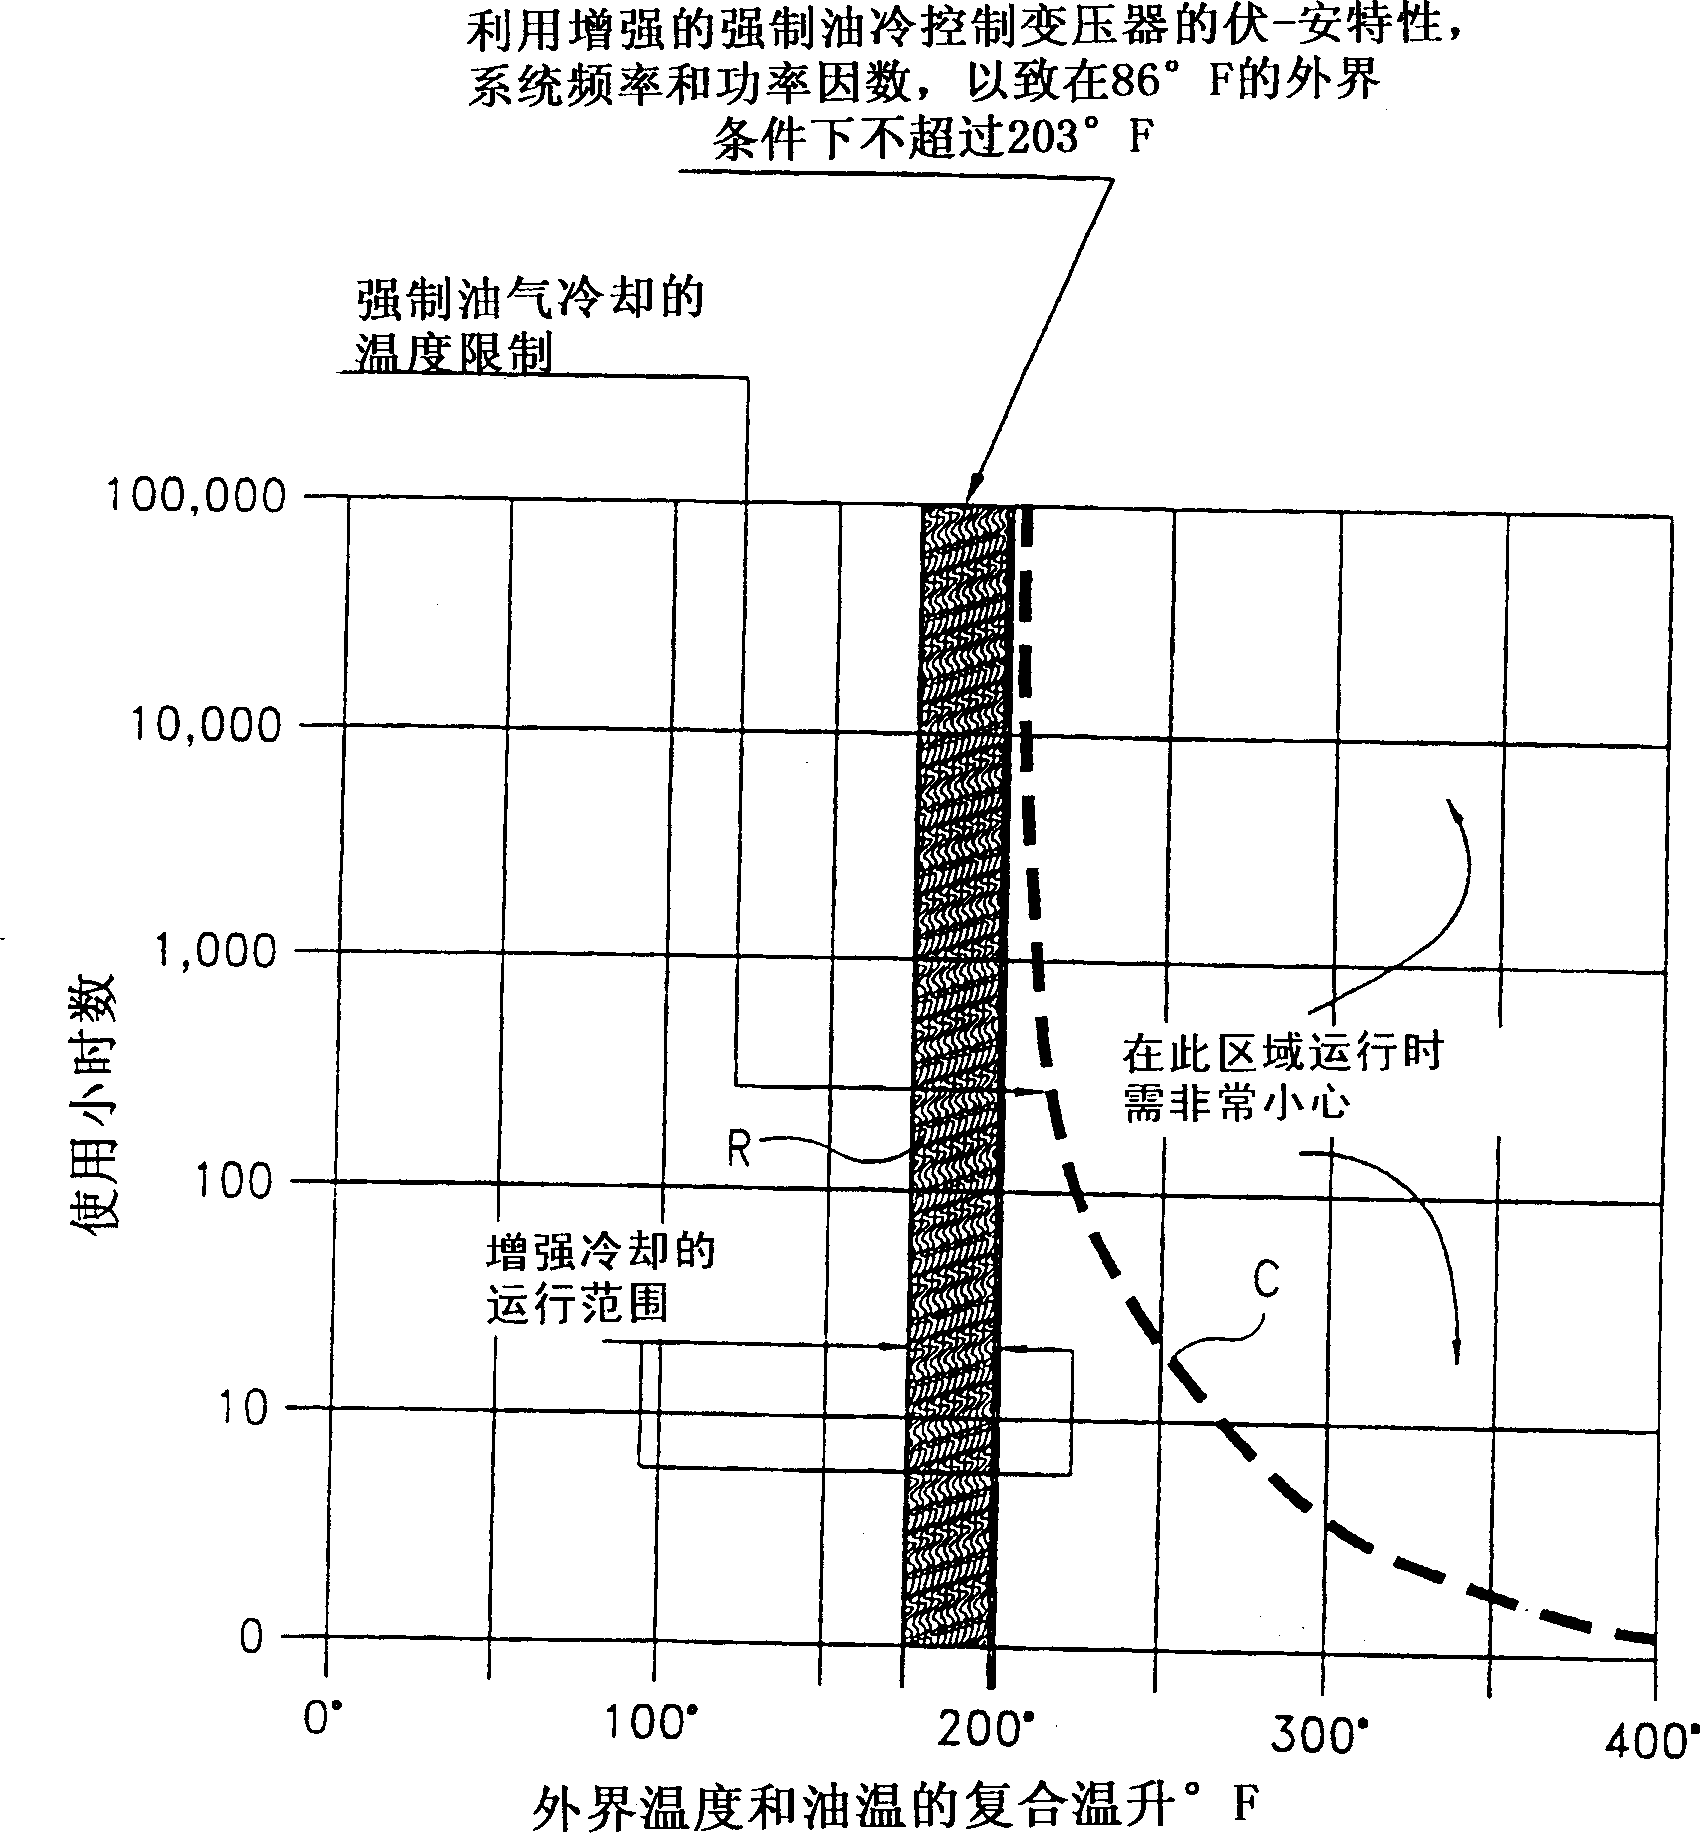 Apparatus and method for cooling power transformers